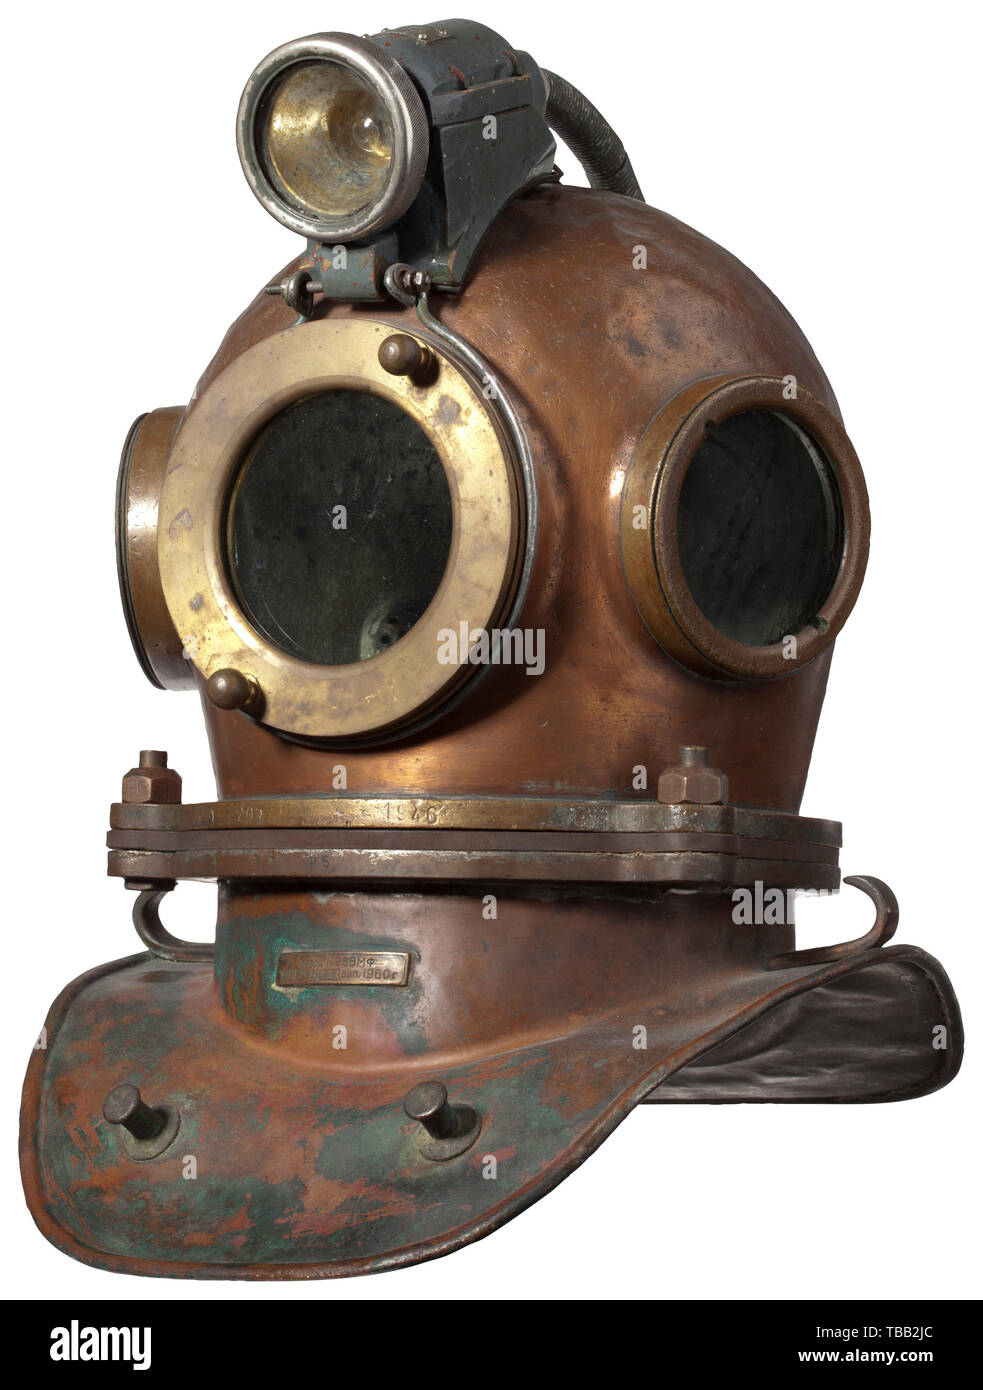 A Russian diving suit Helmet dated 1946. Copper diving helmet with screw-mounted three bolt-system, three brass helmet windows and mounted diving lamp. Helmet and collar with different numbers, the helmet stamped with the date '1946'. Diving suit of rubberised fabric with gloves, the weighted shoes with lead sole and lace fastening. Top of the helmet slightly dented. Height of helmet with collar and lamp 52 cm. historic, historical, 20th century, Additional-Rights-Clearance-Info-Not-Available Stock Photo